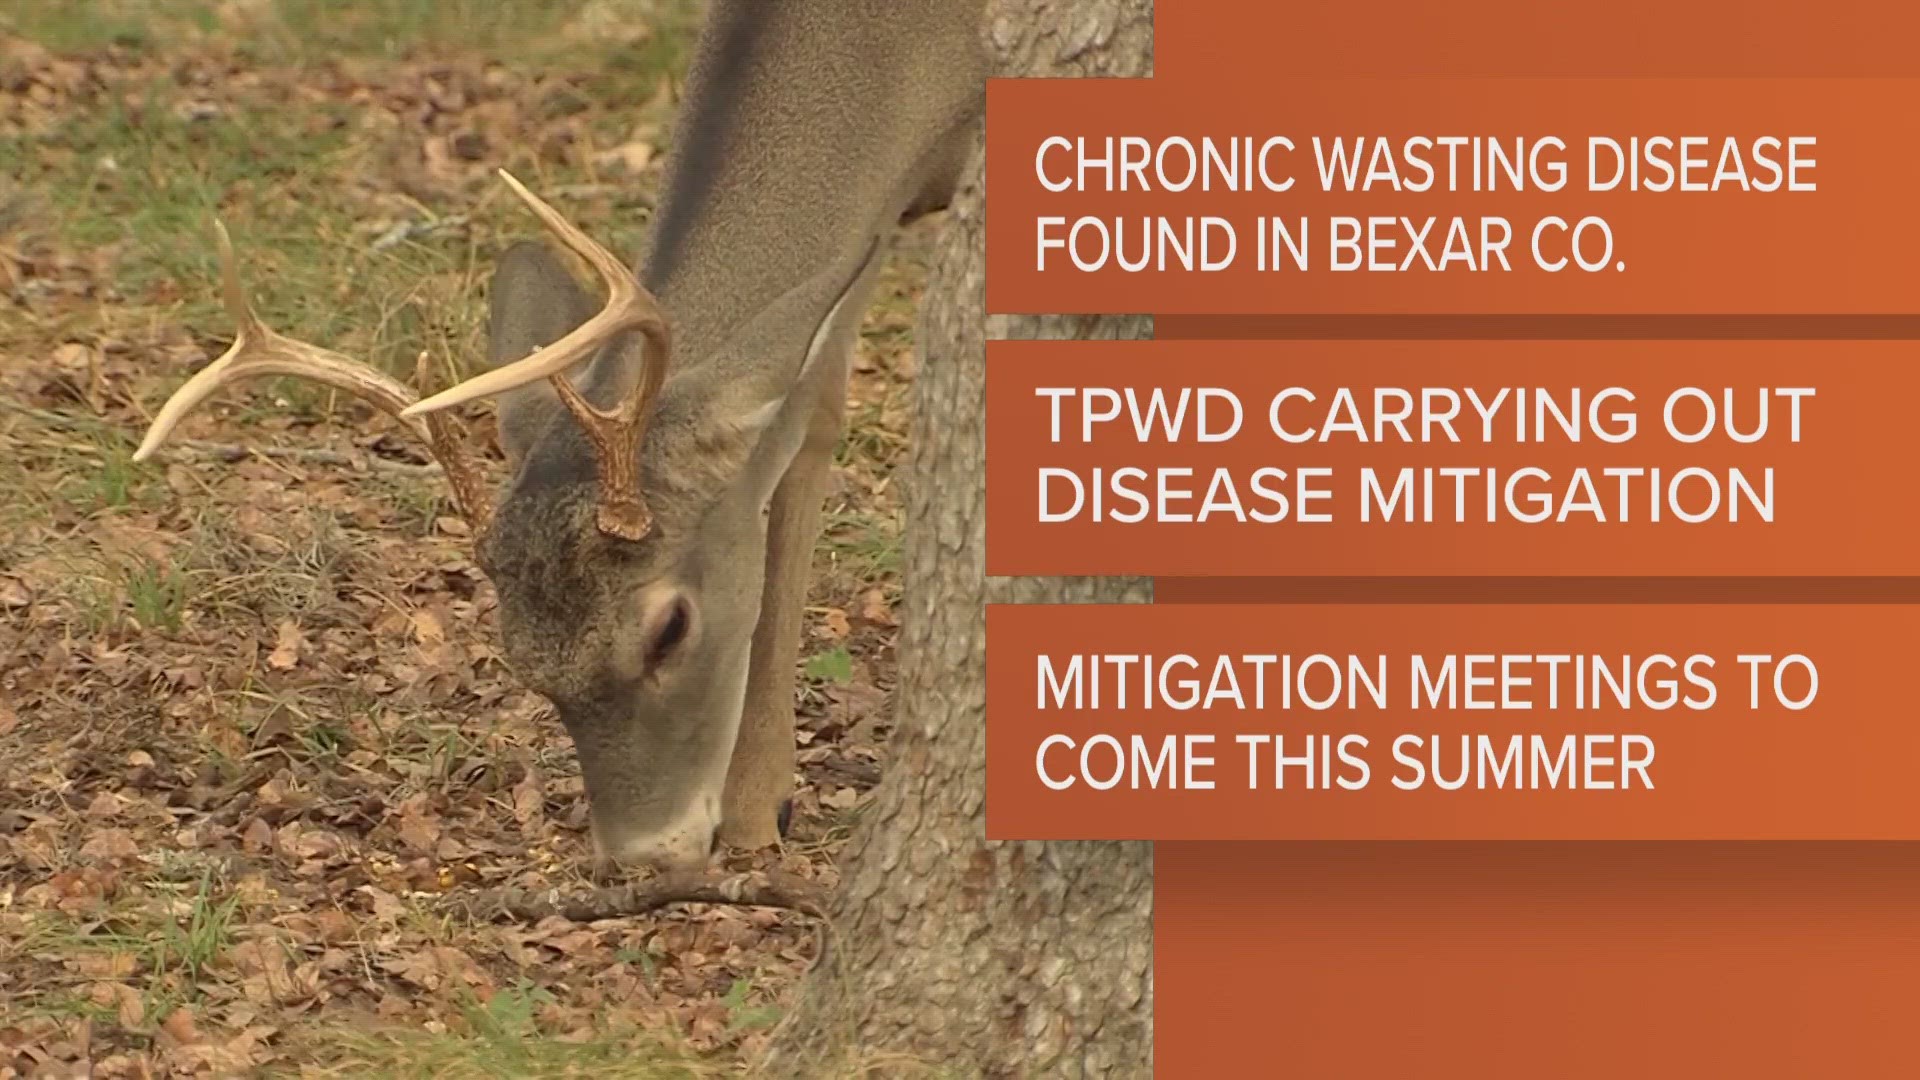 TWPD will hold community meetings this summer to discuss disease mitigation actions.